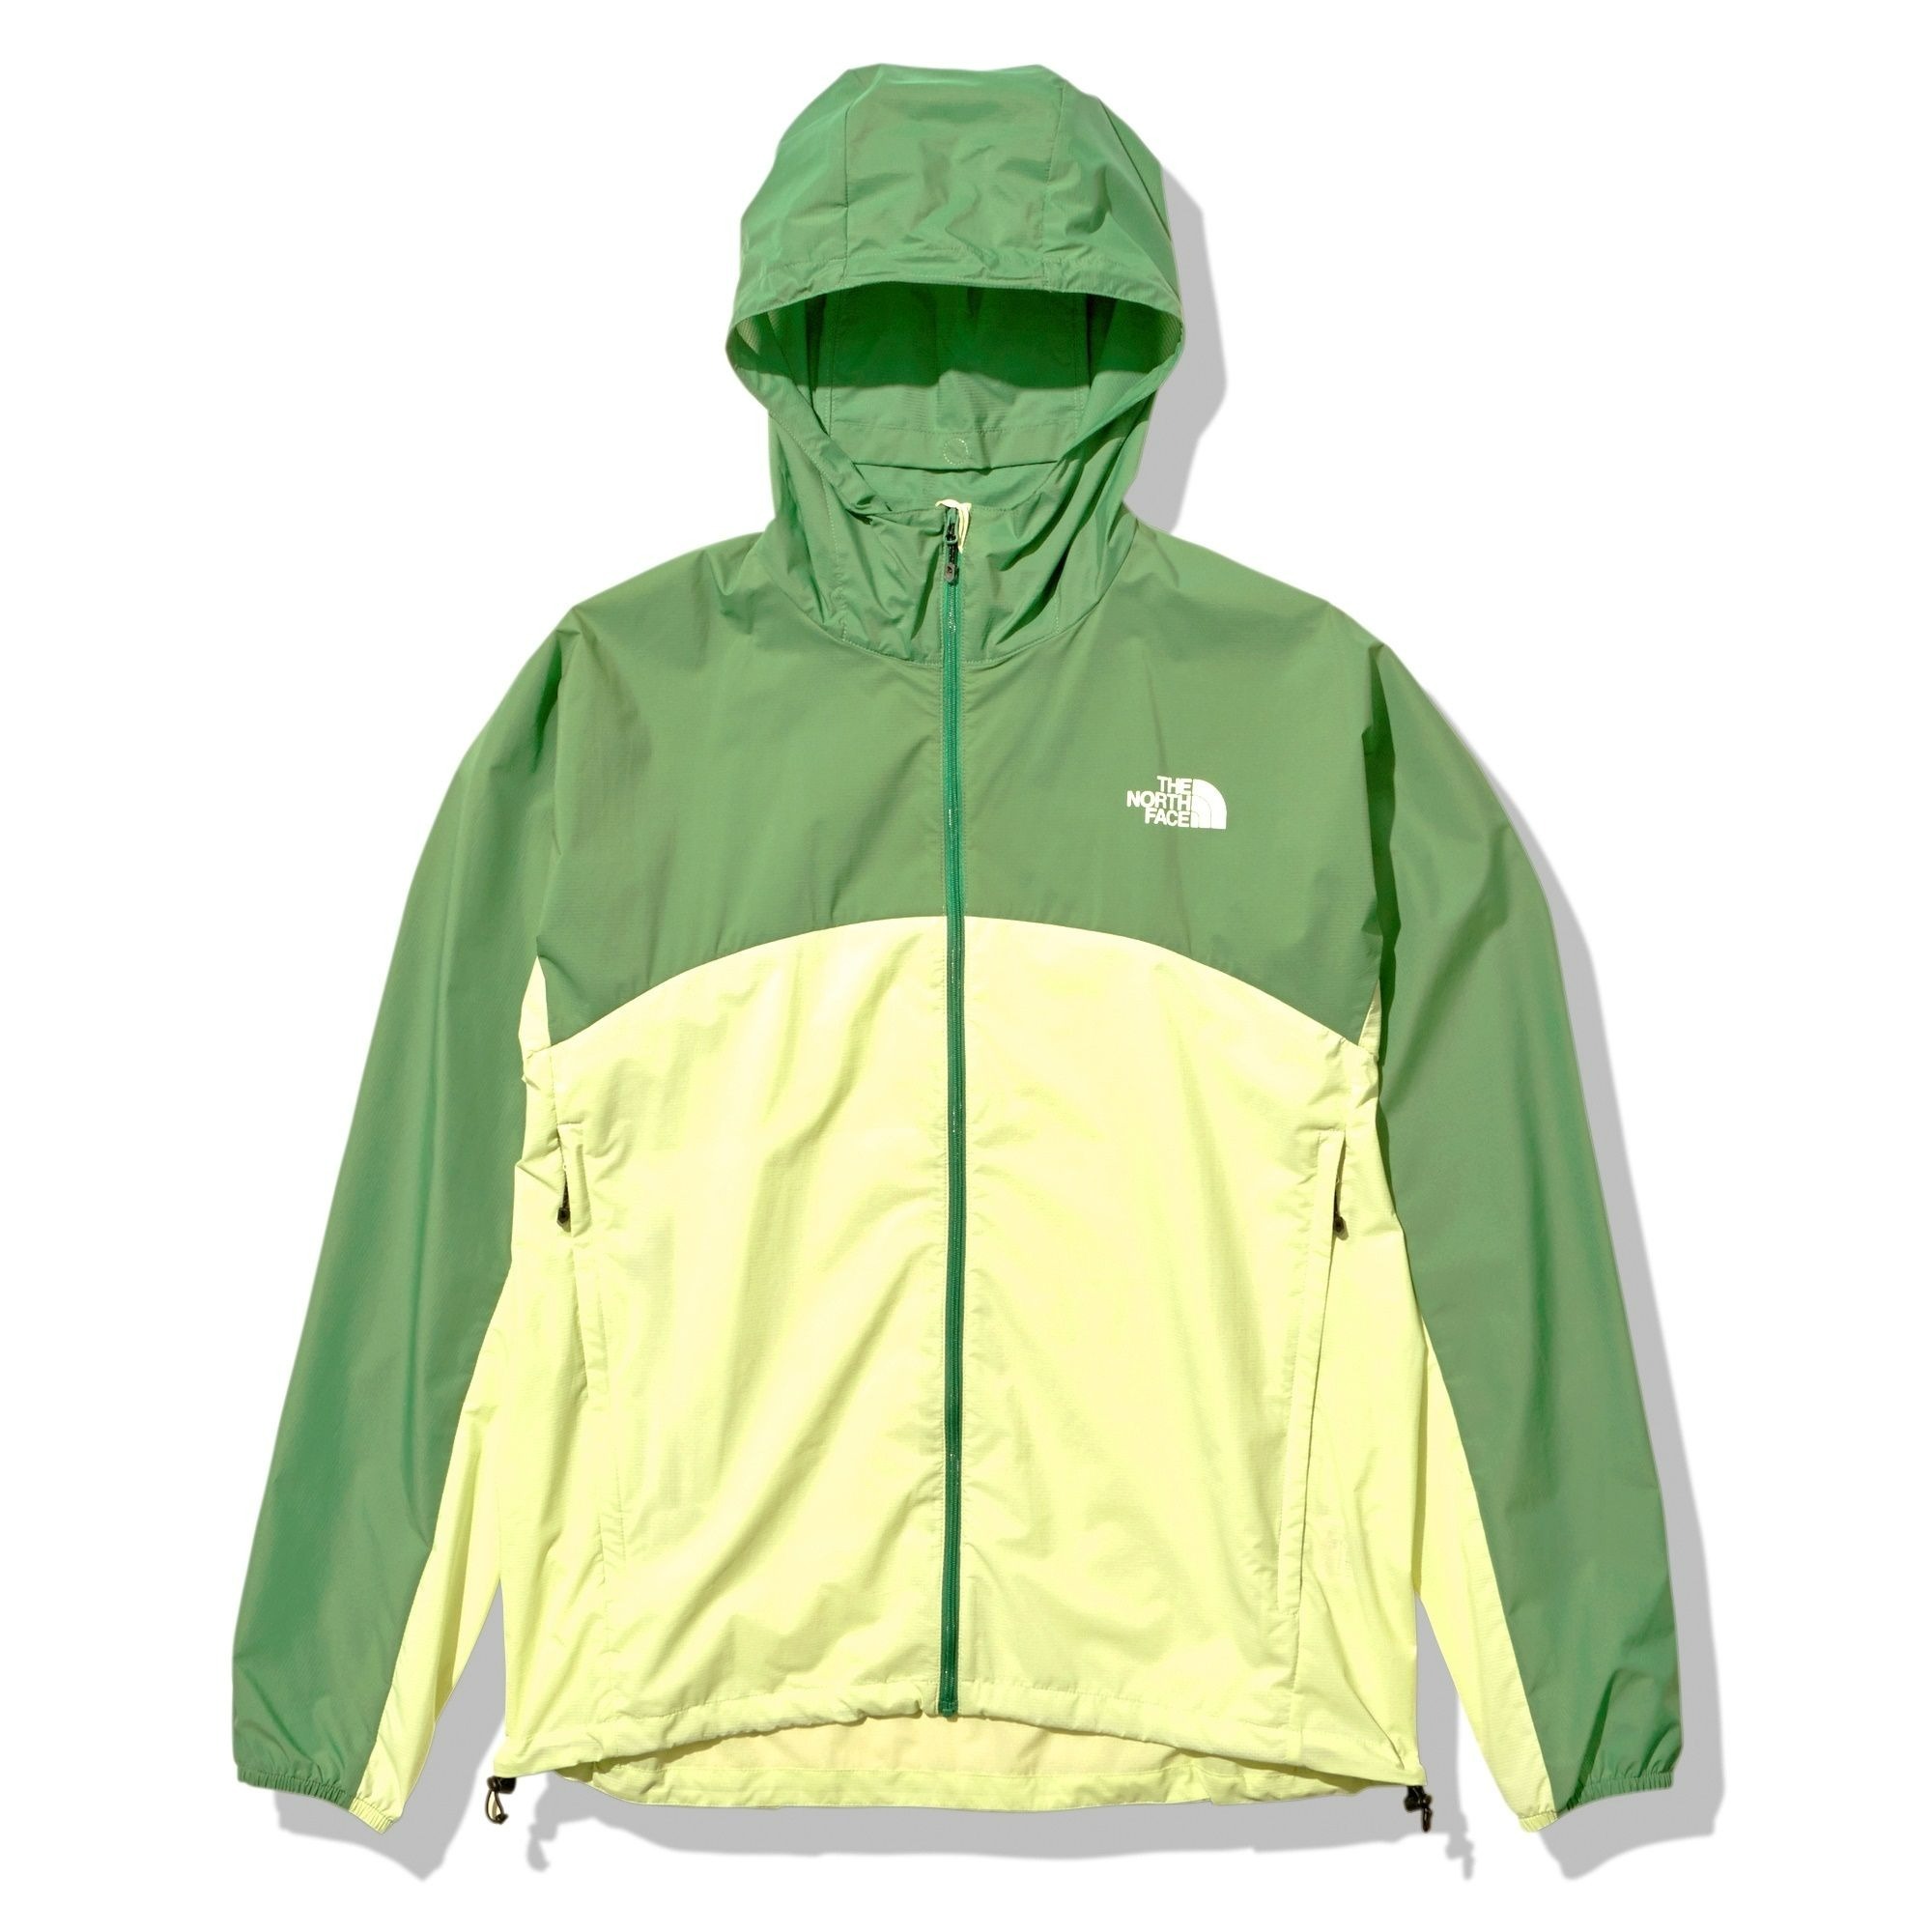 NP22202 日本THE NORTH FACE SWALLOWTAIL HOODIE 連帽外套